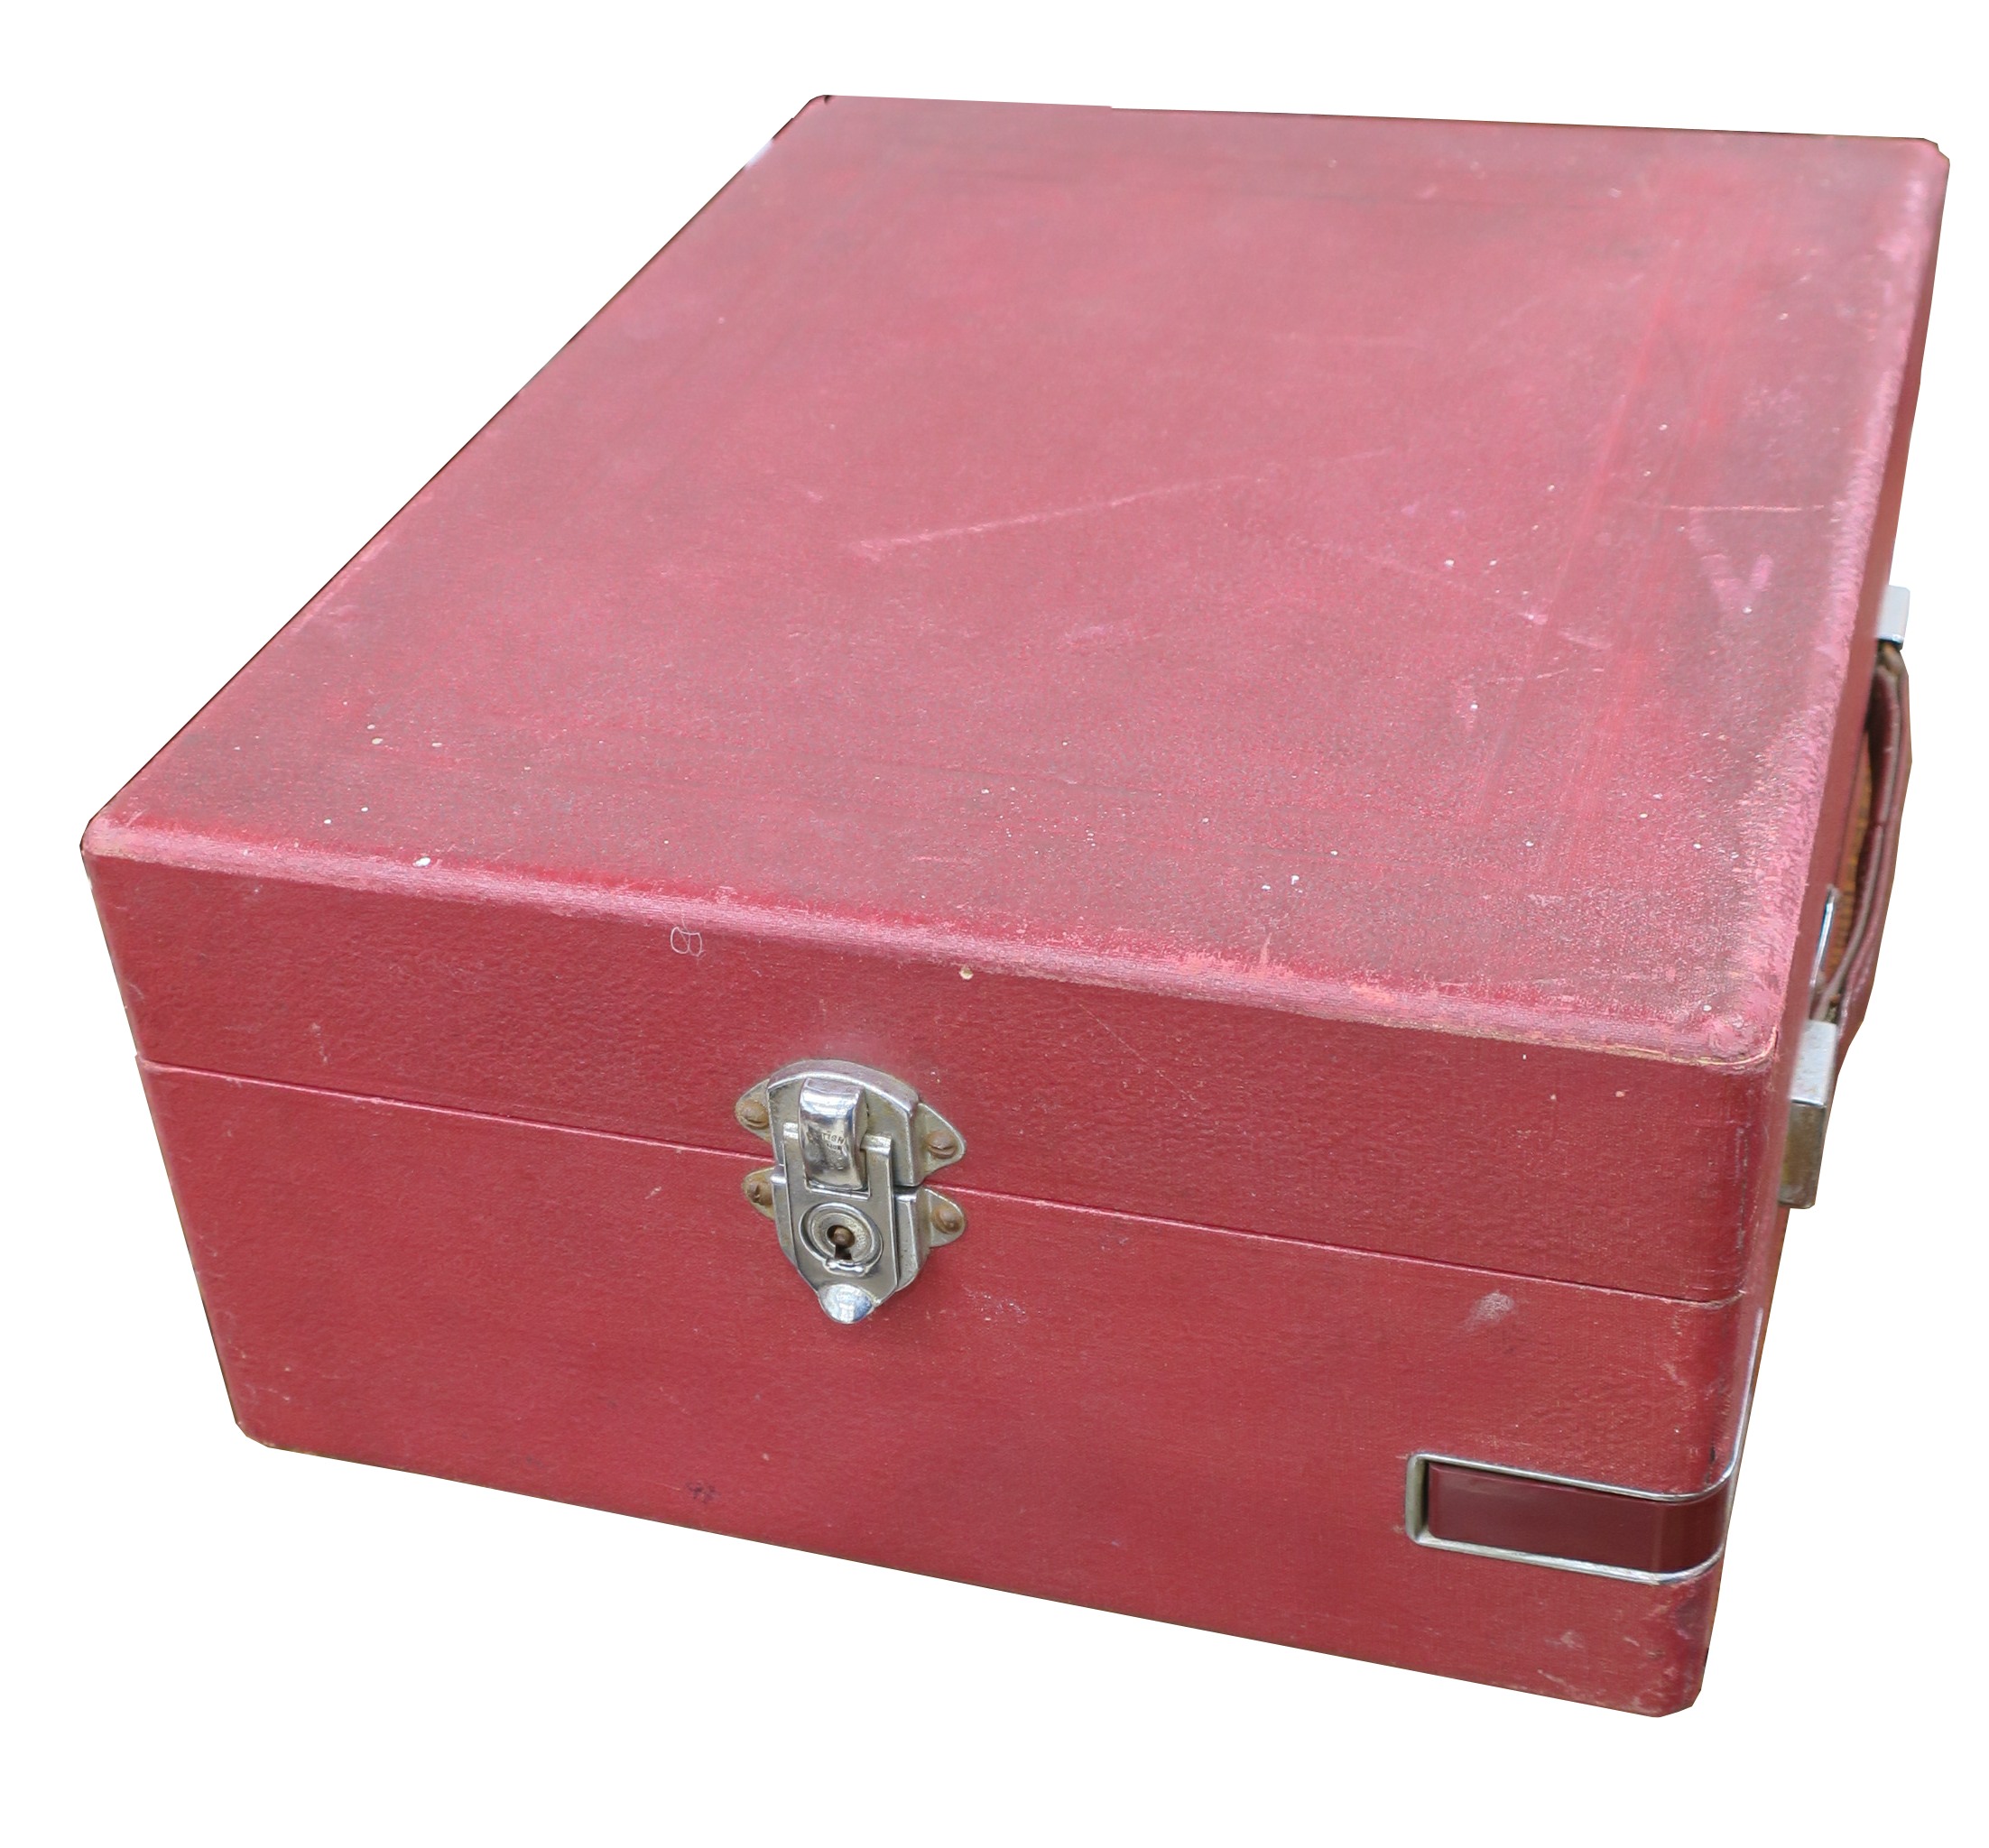 A portable gramophone, HMV Model 97 in red case with No. 21 soundbox, record tray and lid key, - Image 2 of 2